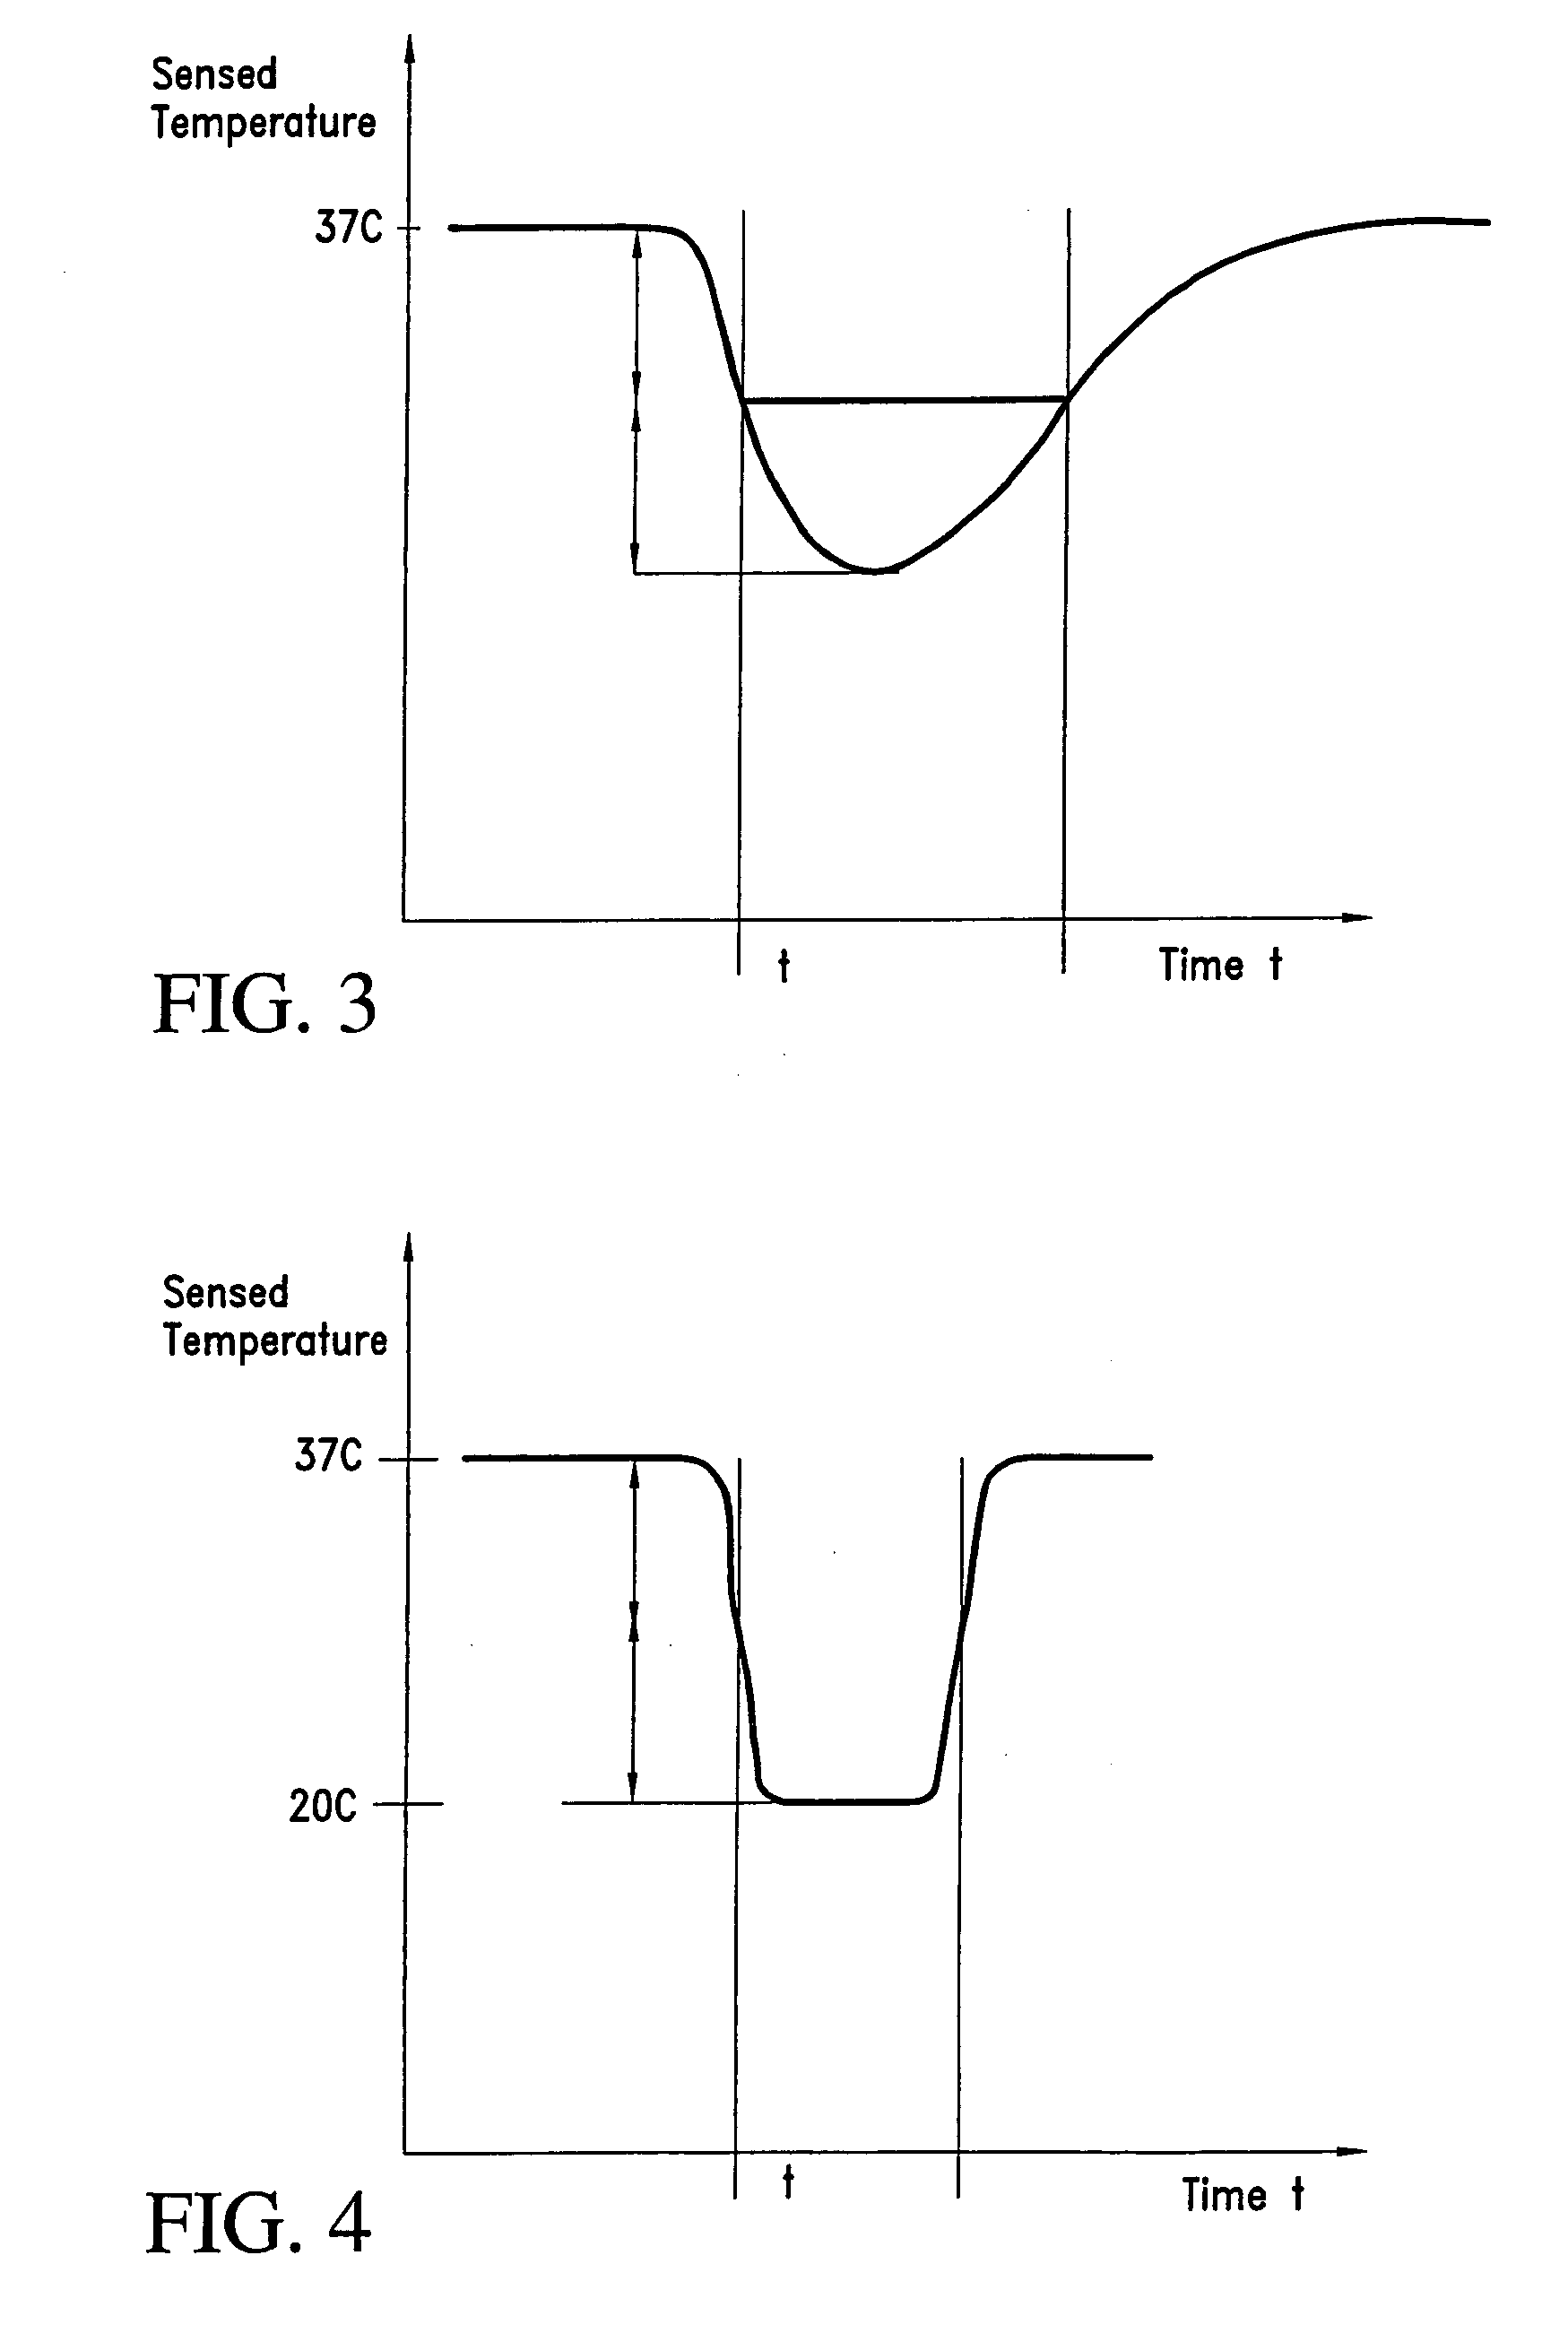 Compensation method for thermodilution catheter having an injectate induced thermal effect in a blood flow measurement